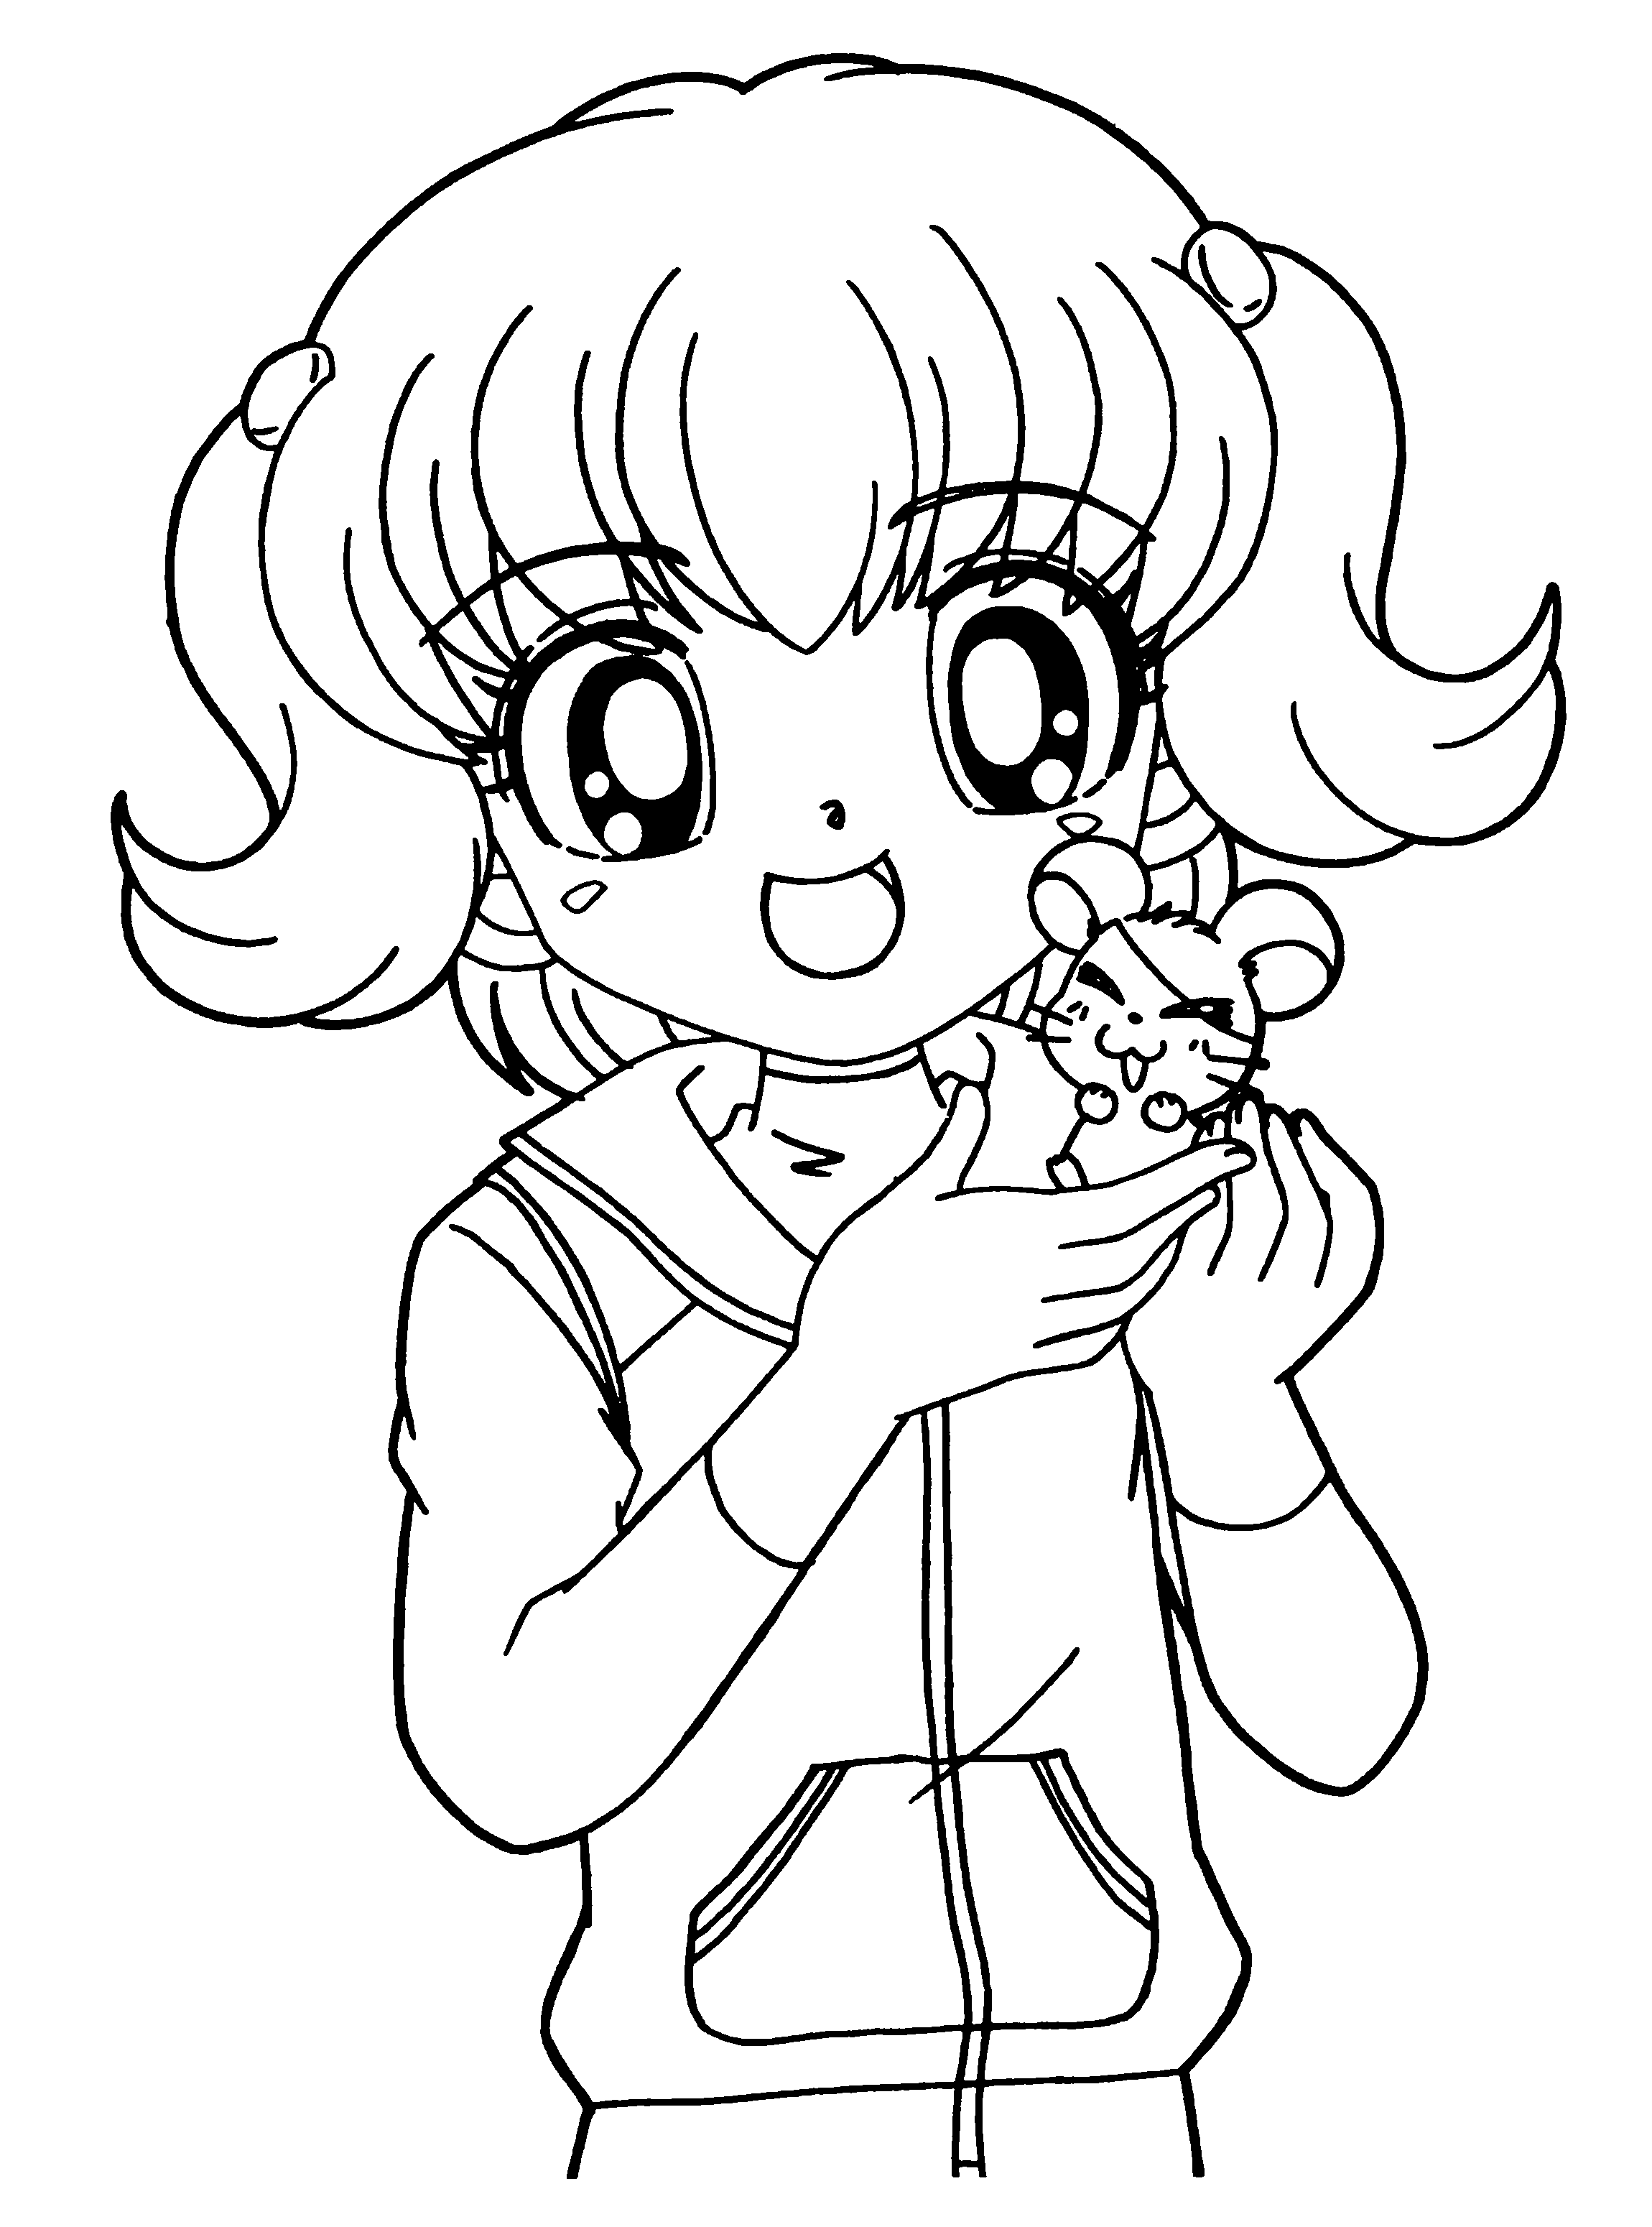 Cute Anime - Coloring Pages for Kids and for Adults